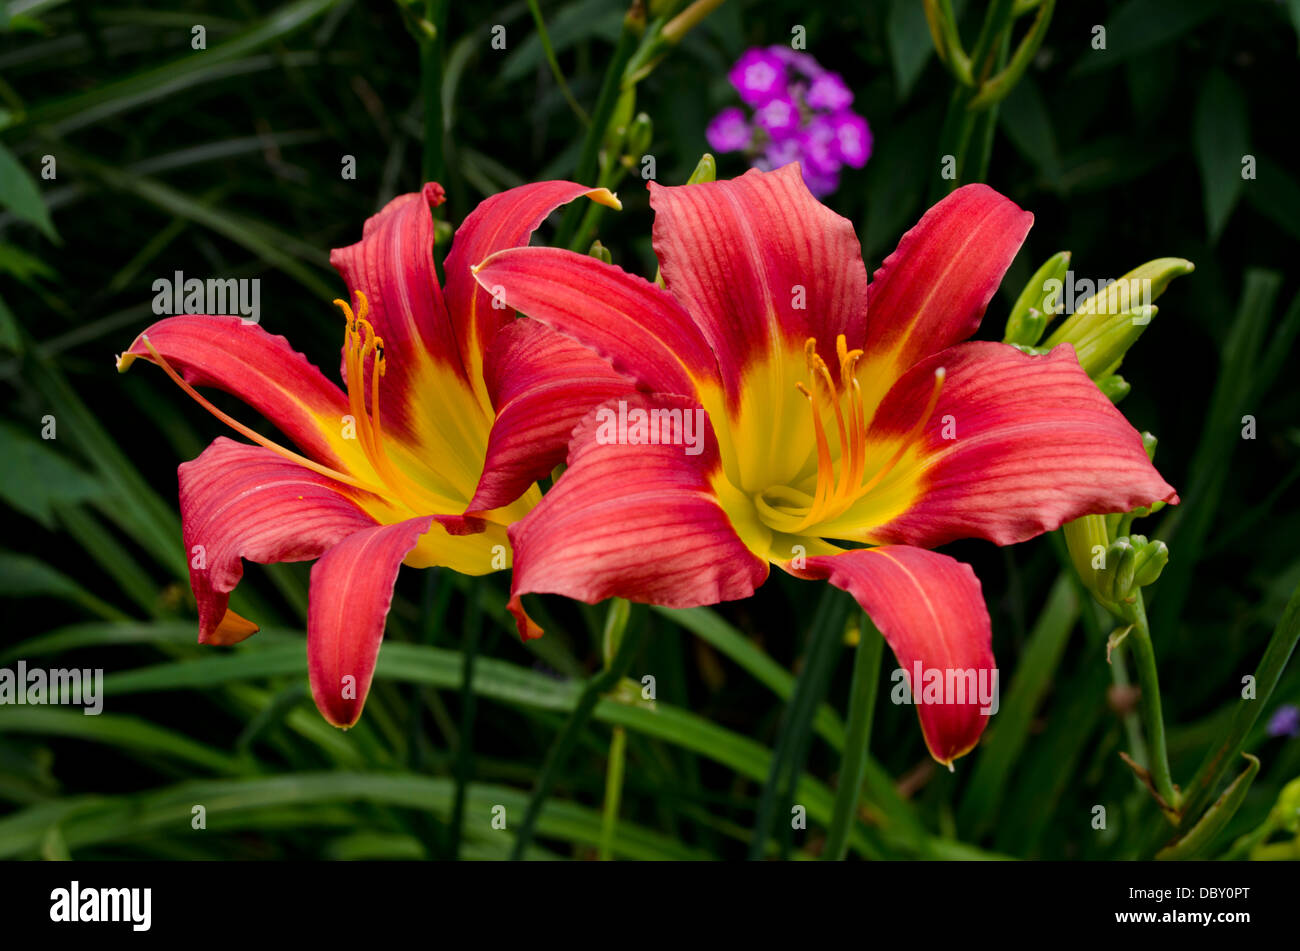 Brightly coloured red and yellow daylilies - Hemerocallis - in a summer garden. Stock Photo